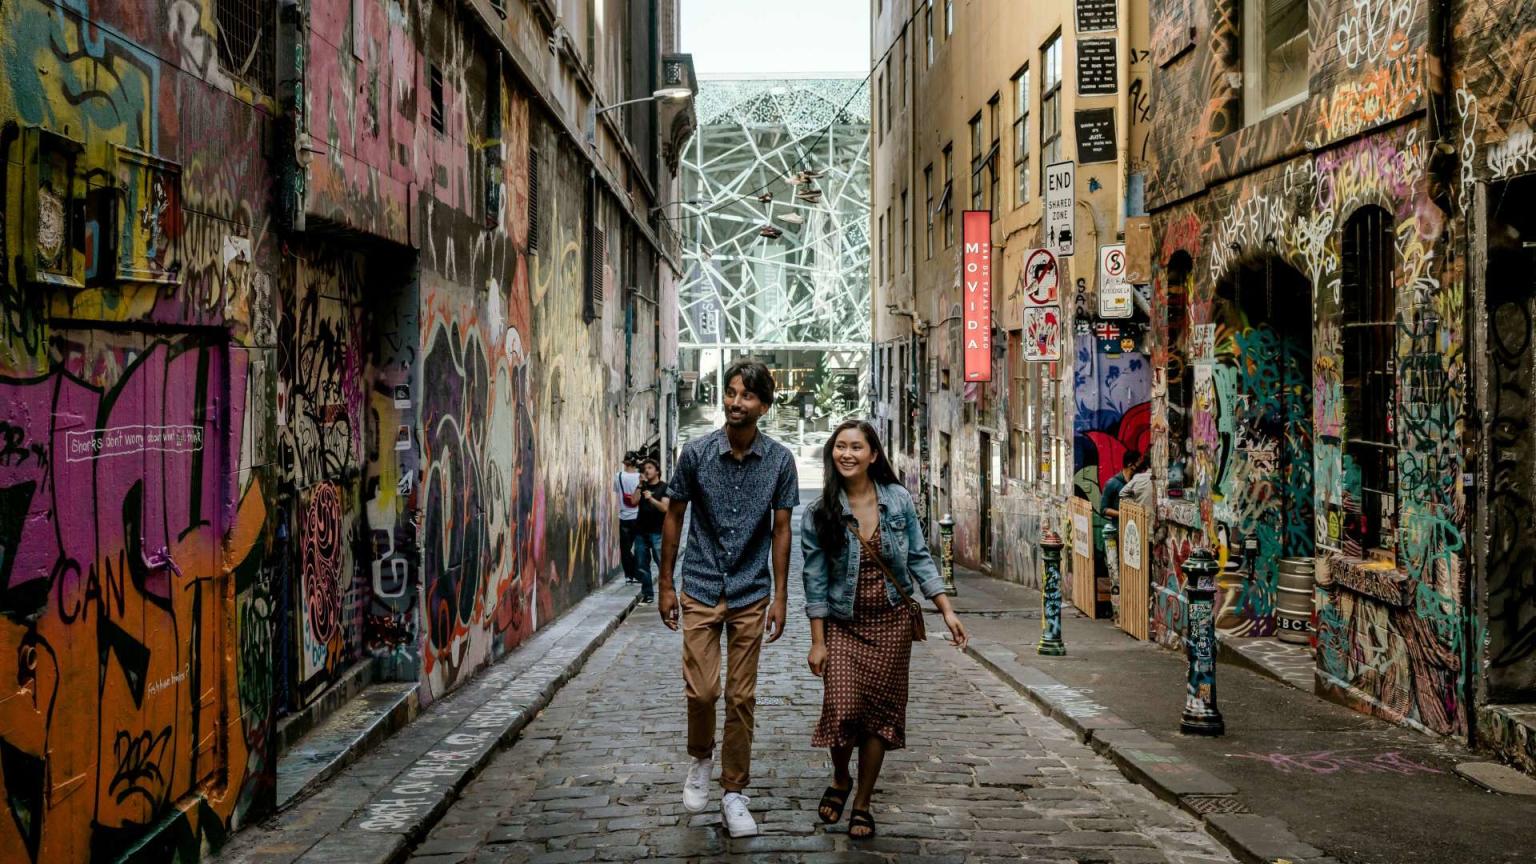 Melbourne Event Destination: Two people walking down a street with graffiti artwork displayed on the walls. 